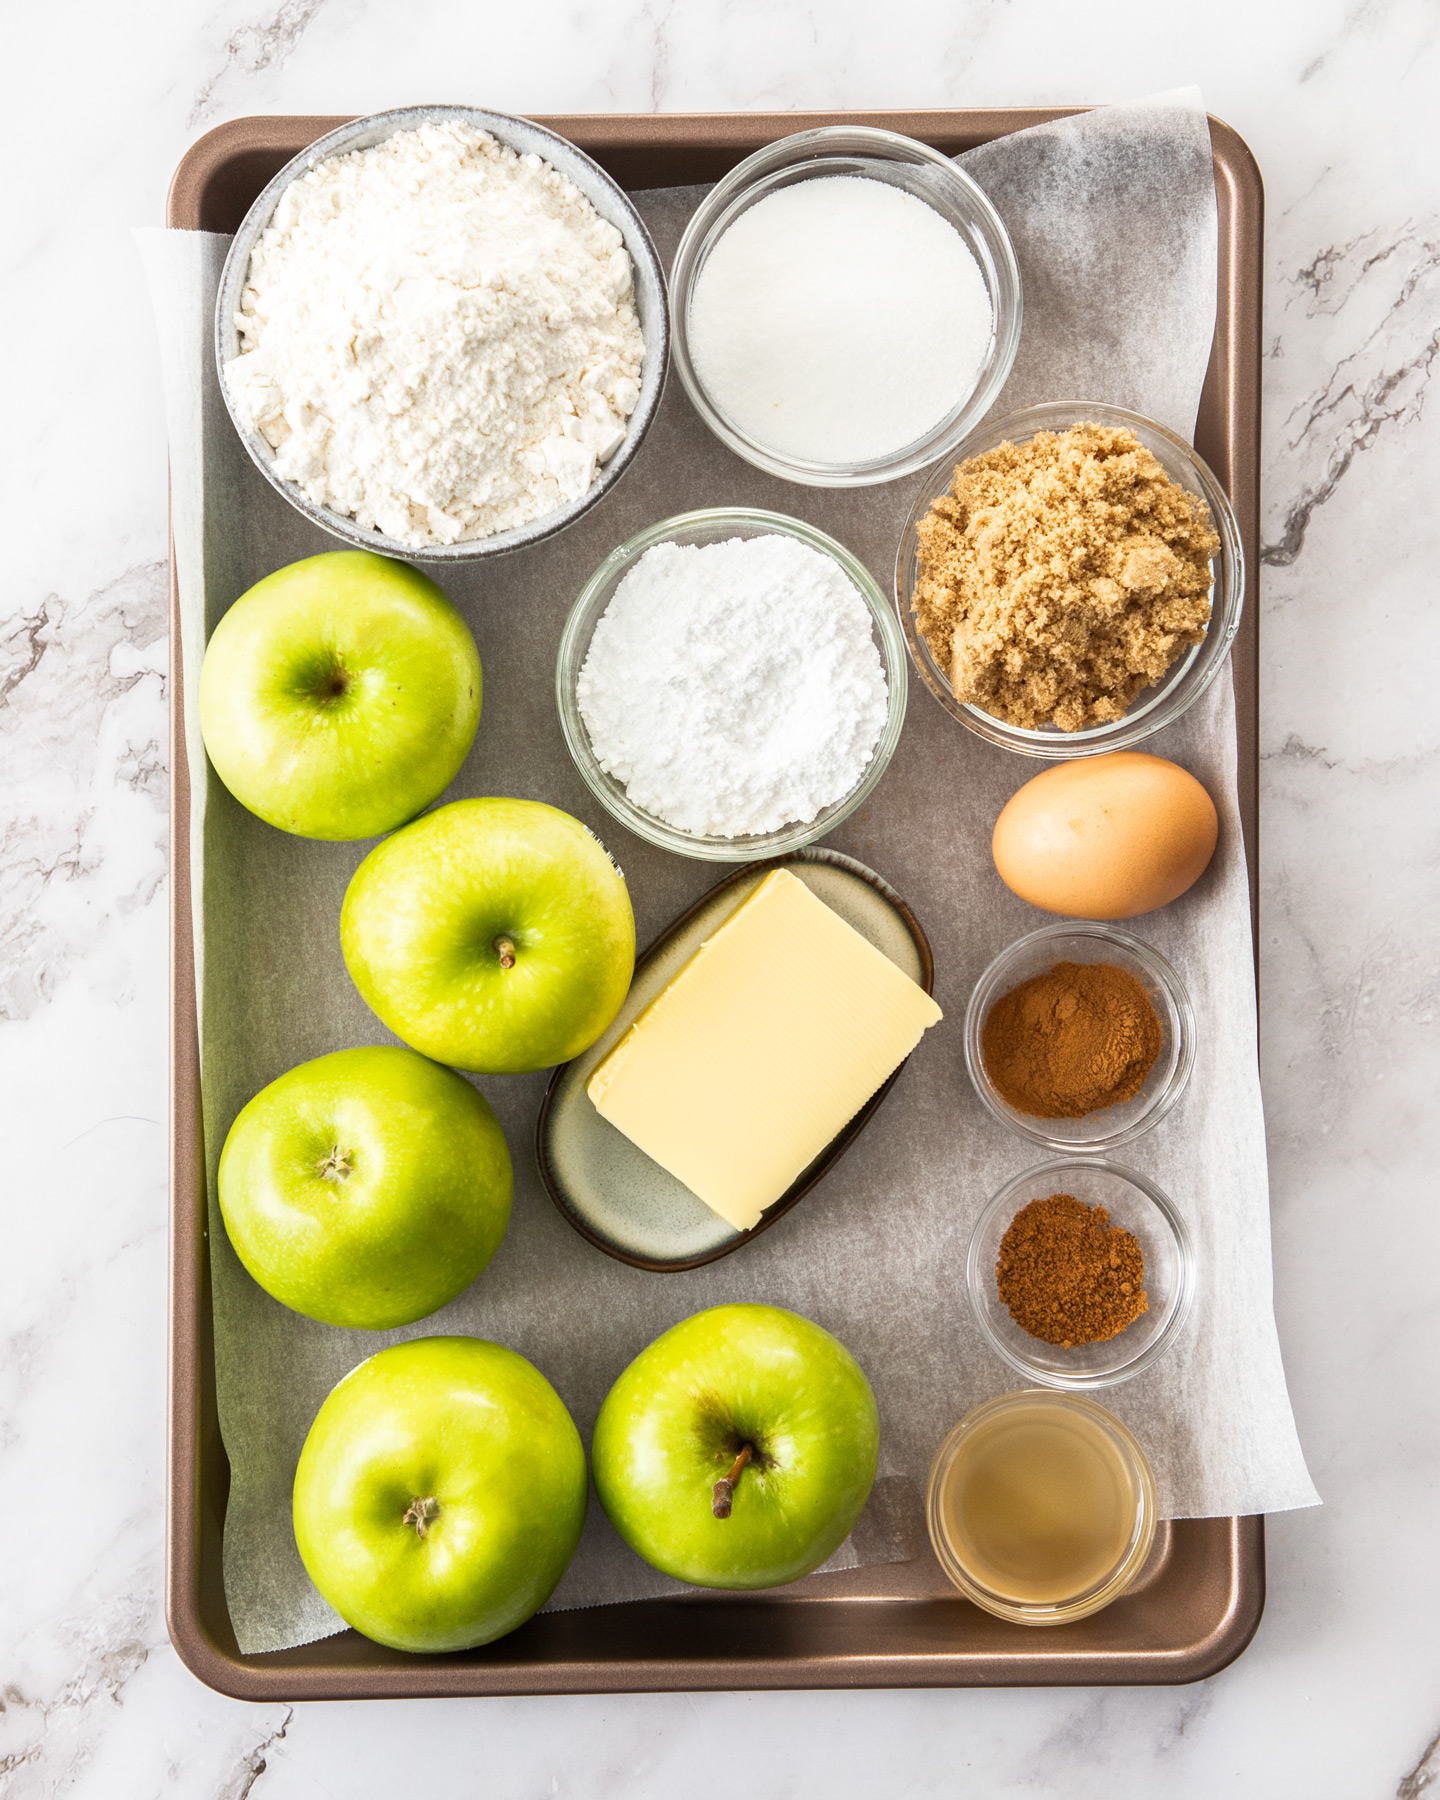 Ingredients for apple crumble tart of a baking tray.